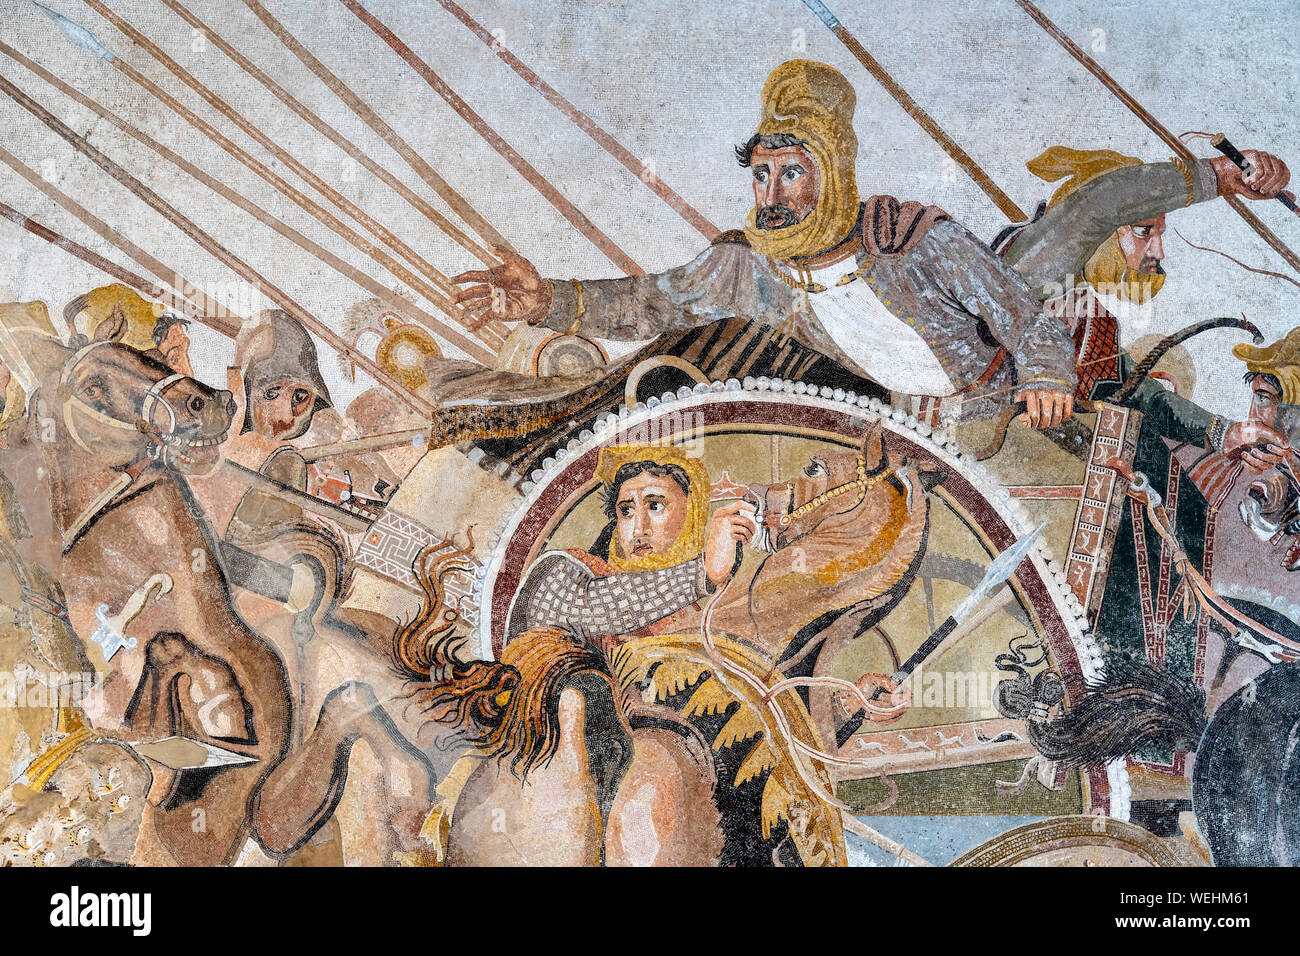 Detail of the Alexander the Great Mosaic depicting Darius the Persian emperor. Originally from the House of the Faun in Pompeii, now at at the Naples Stock Photo